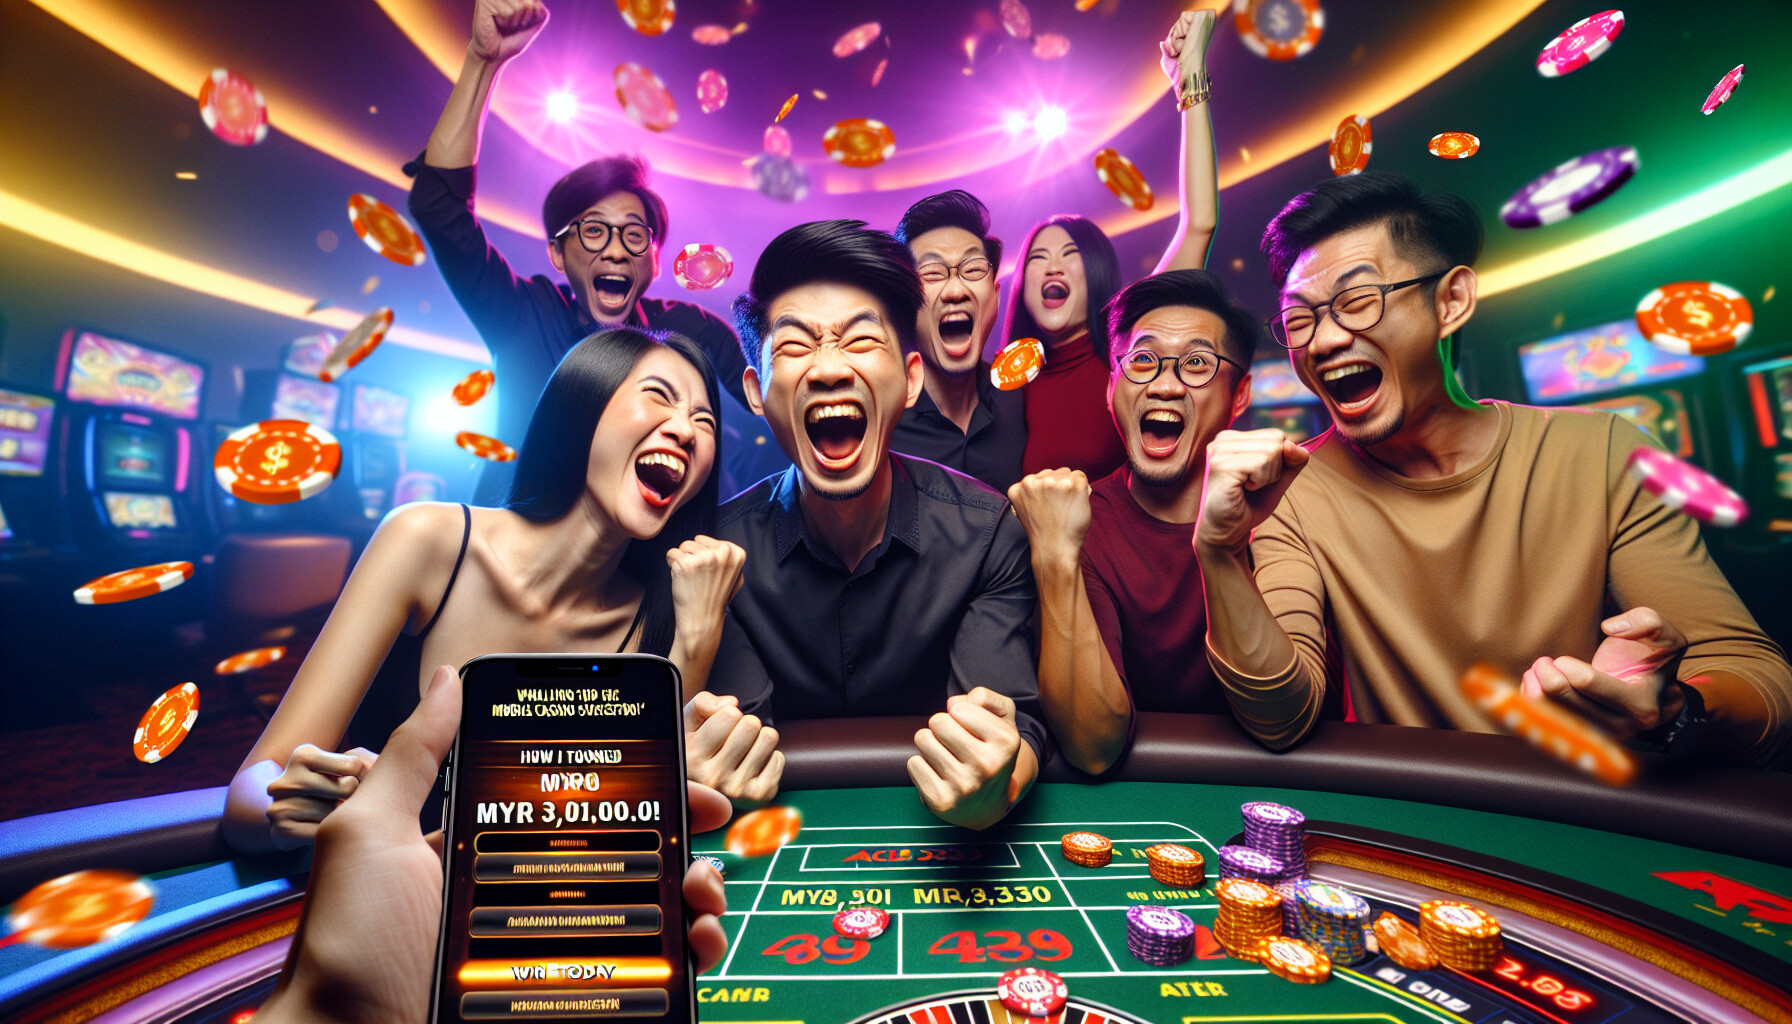 Discover the thrilling journey of Ace333 in MYR! 🎉 From MYR 500.00 to MYR 8,000.00, you won't believe the incredible transformation! 💸 Join us now and experience the game-changing adventure. 💥